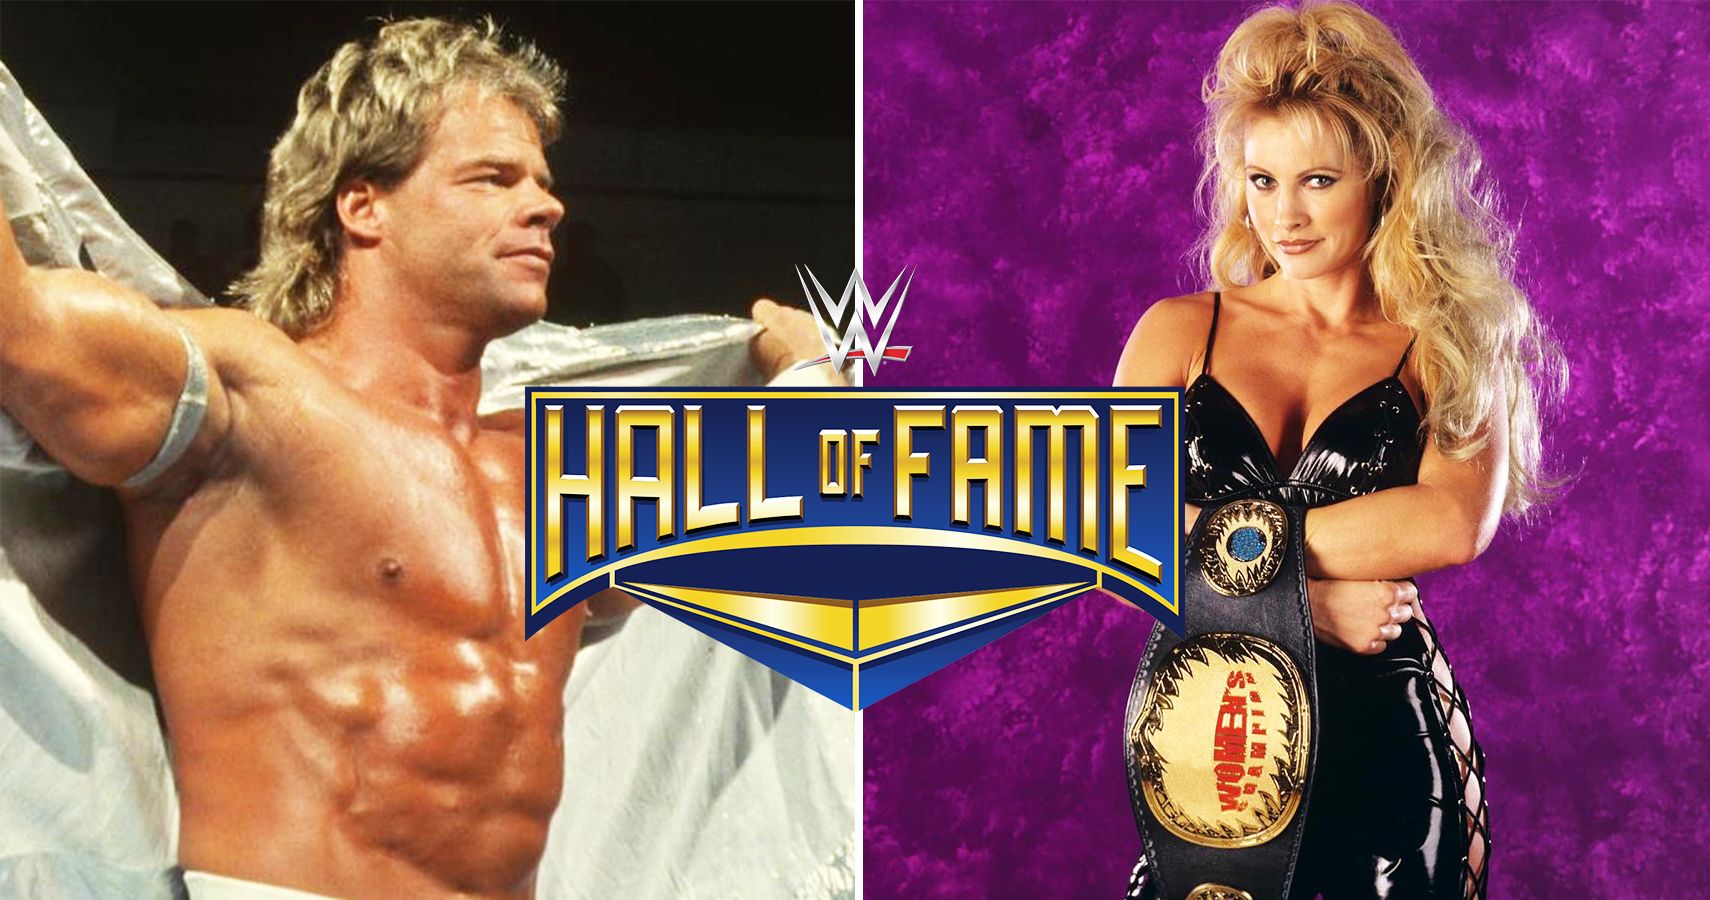 15 Wrestlers Who NEED To Be In The WWE Hall of Fame Class Of 2018